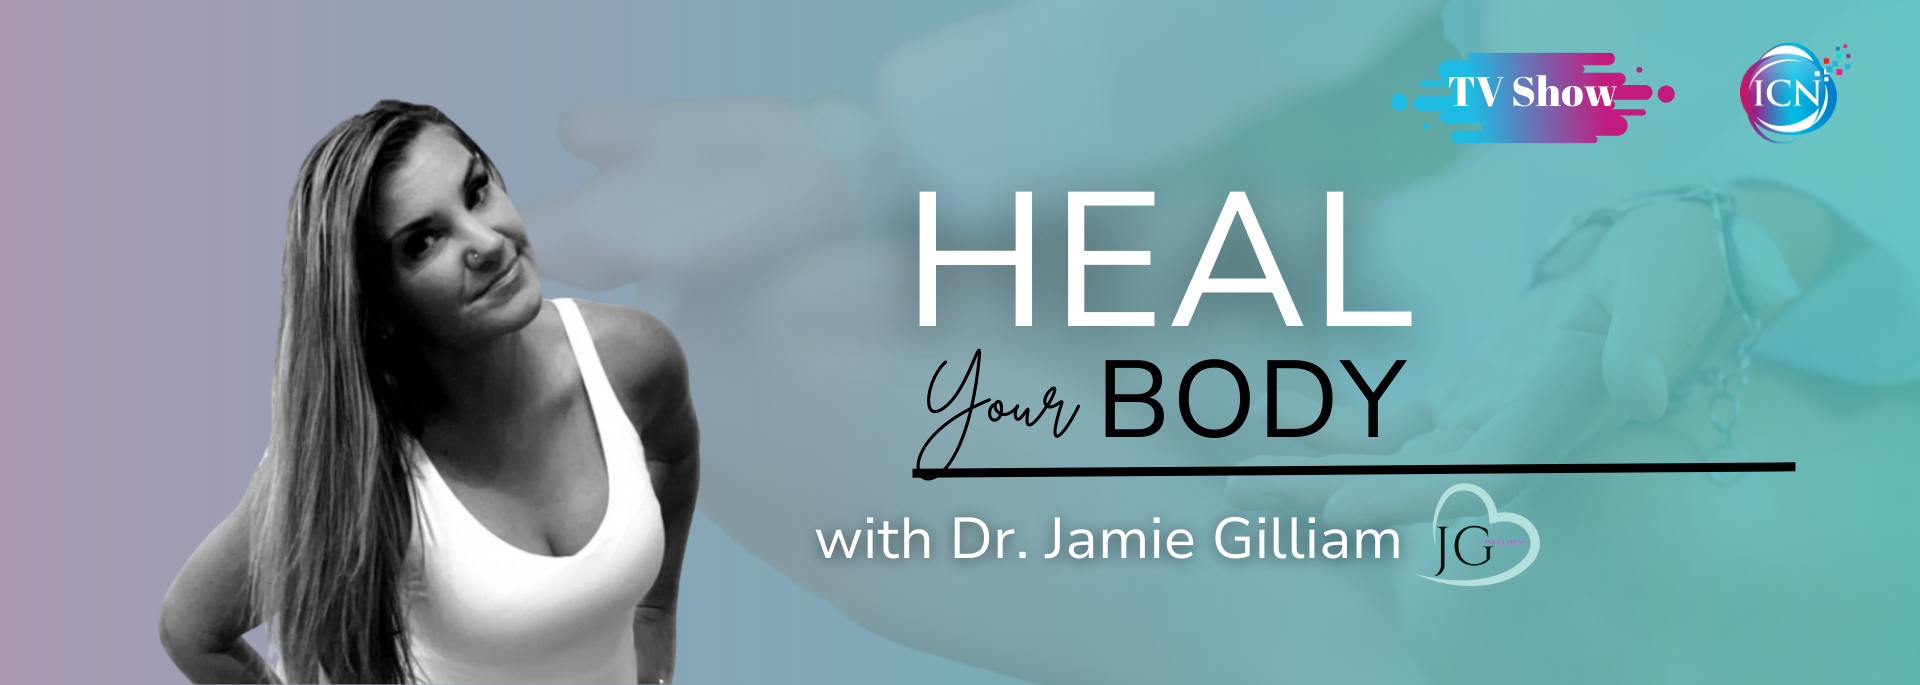 Heal Your Body with Dr. Jamie Gilliam